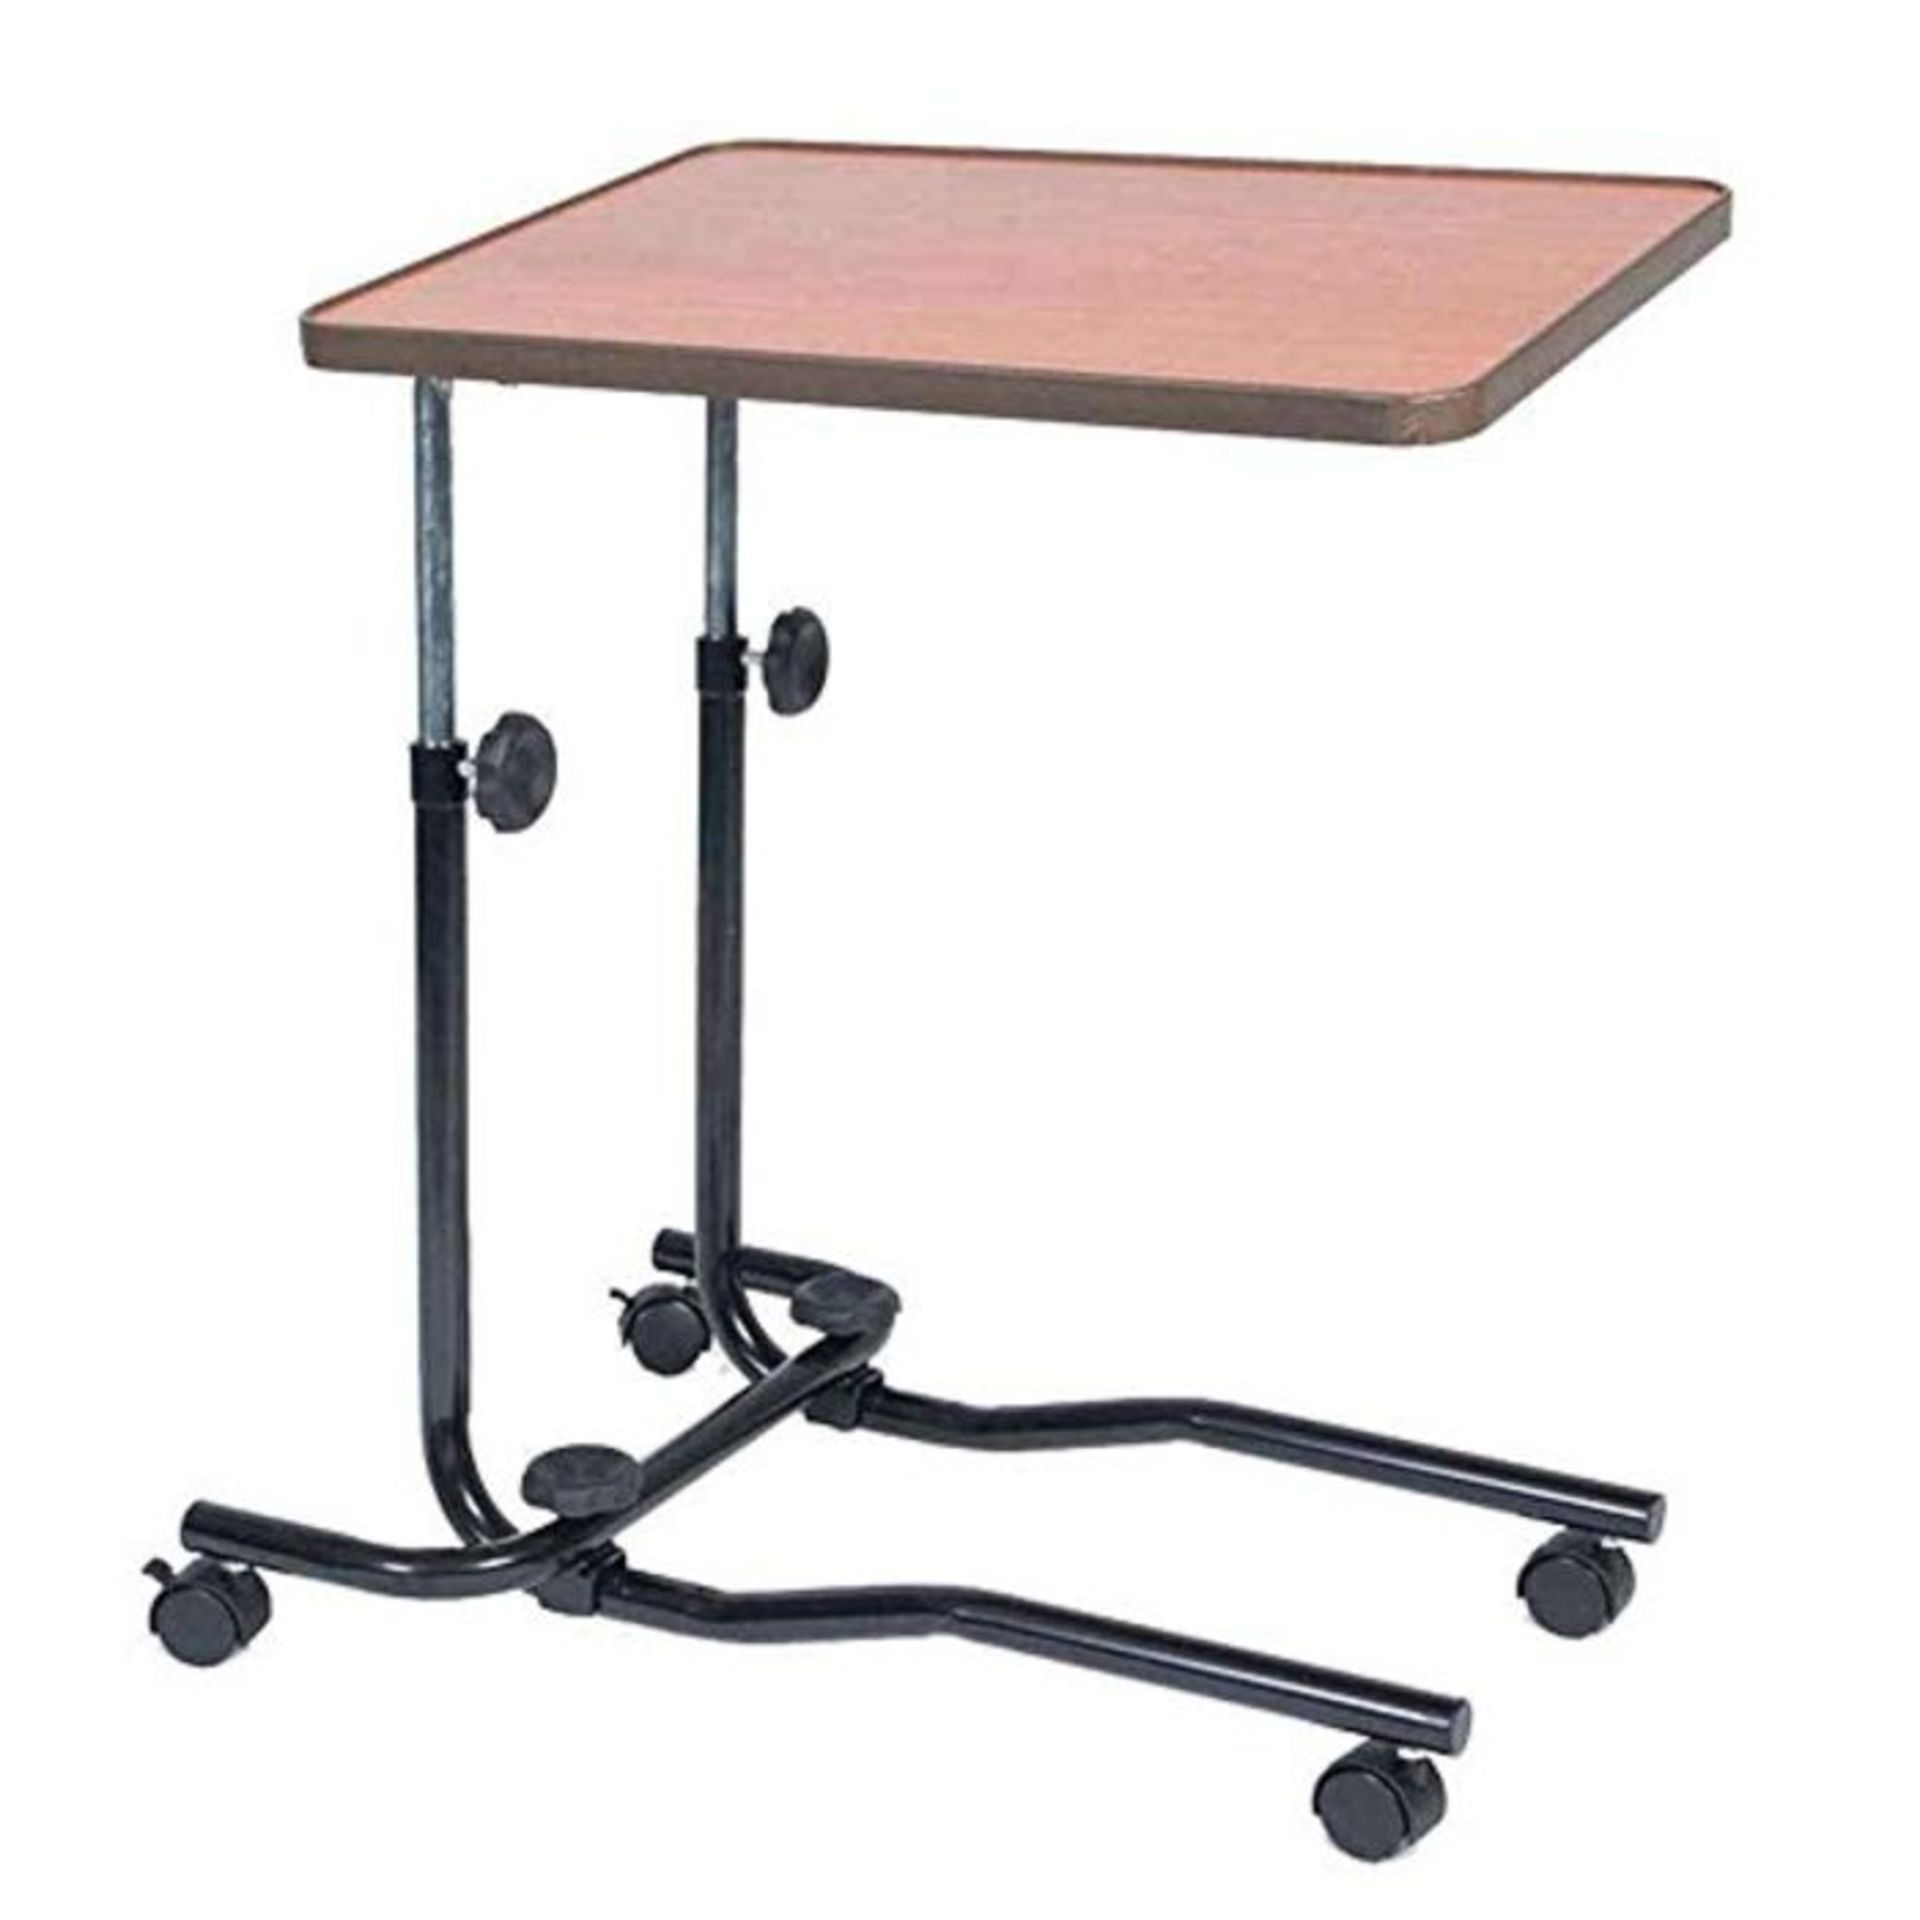 NRS Healthcare M15691 Portable Overbed/Chair Table - Tilting, Adjustable and Wheeled